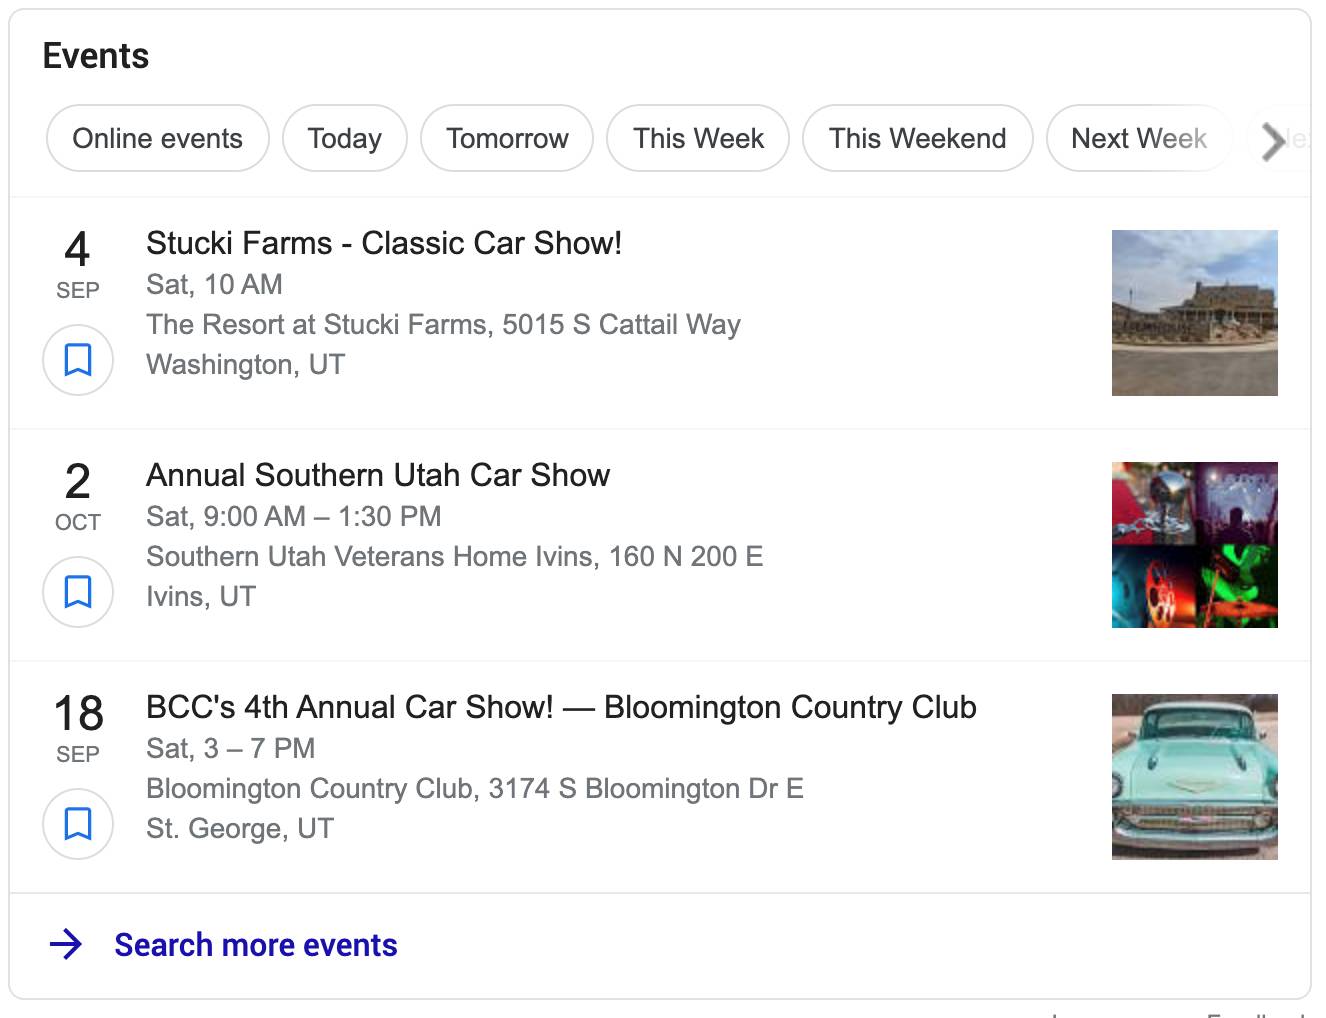 How to Use a WordPress Event Manager Plugin to Host Classic Car Show Events